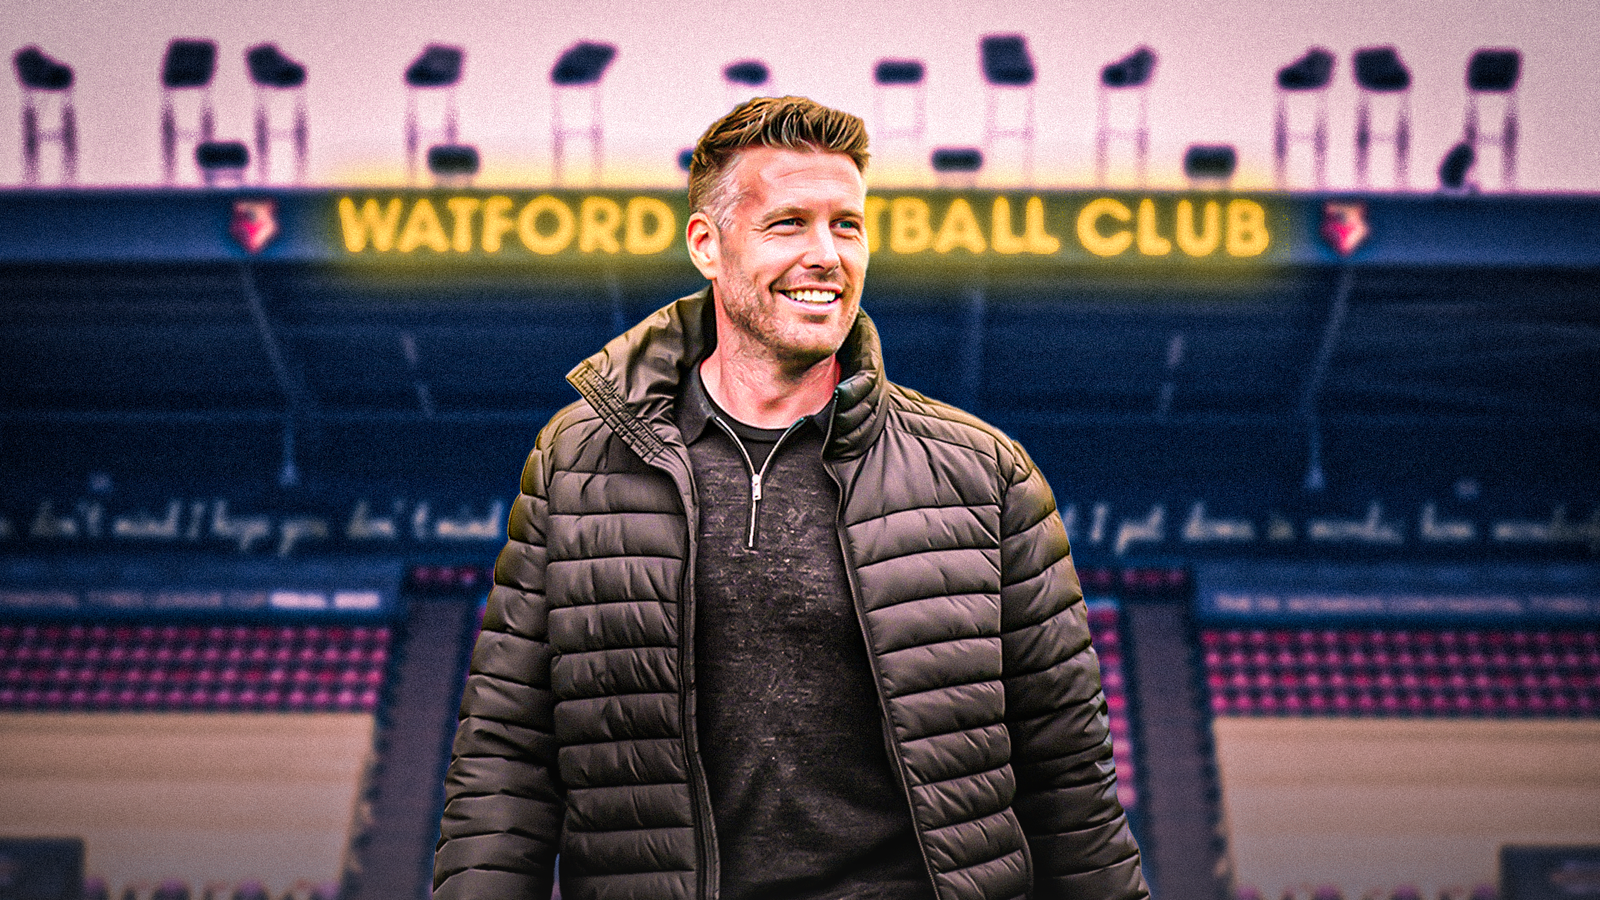 Watford appoint Rob Edwards as head coach to replace Roy Hodgson